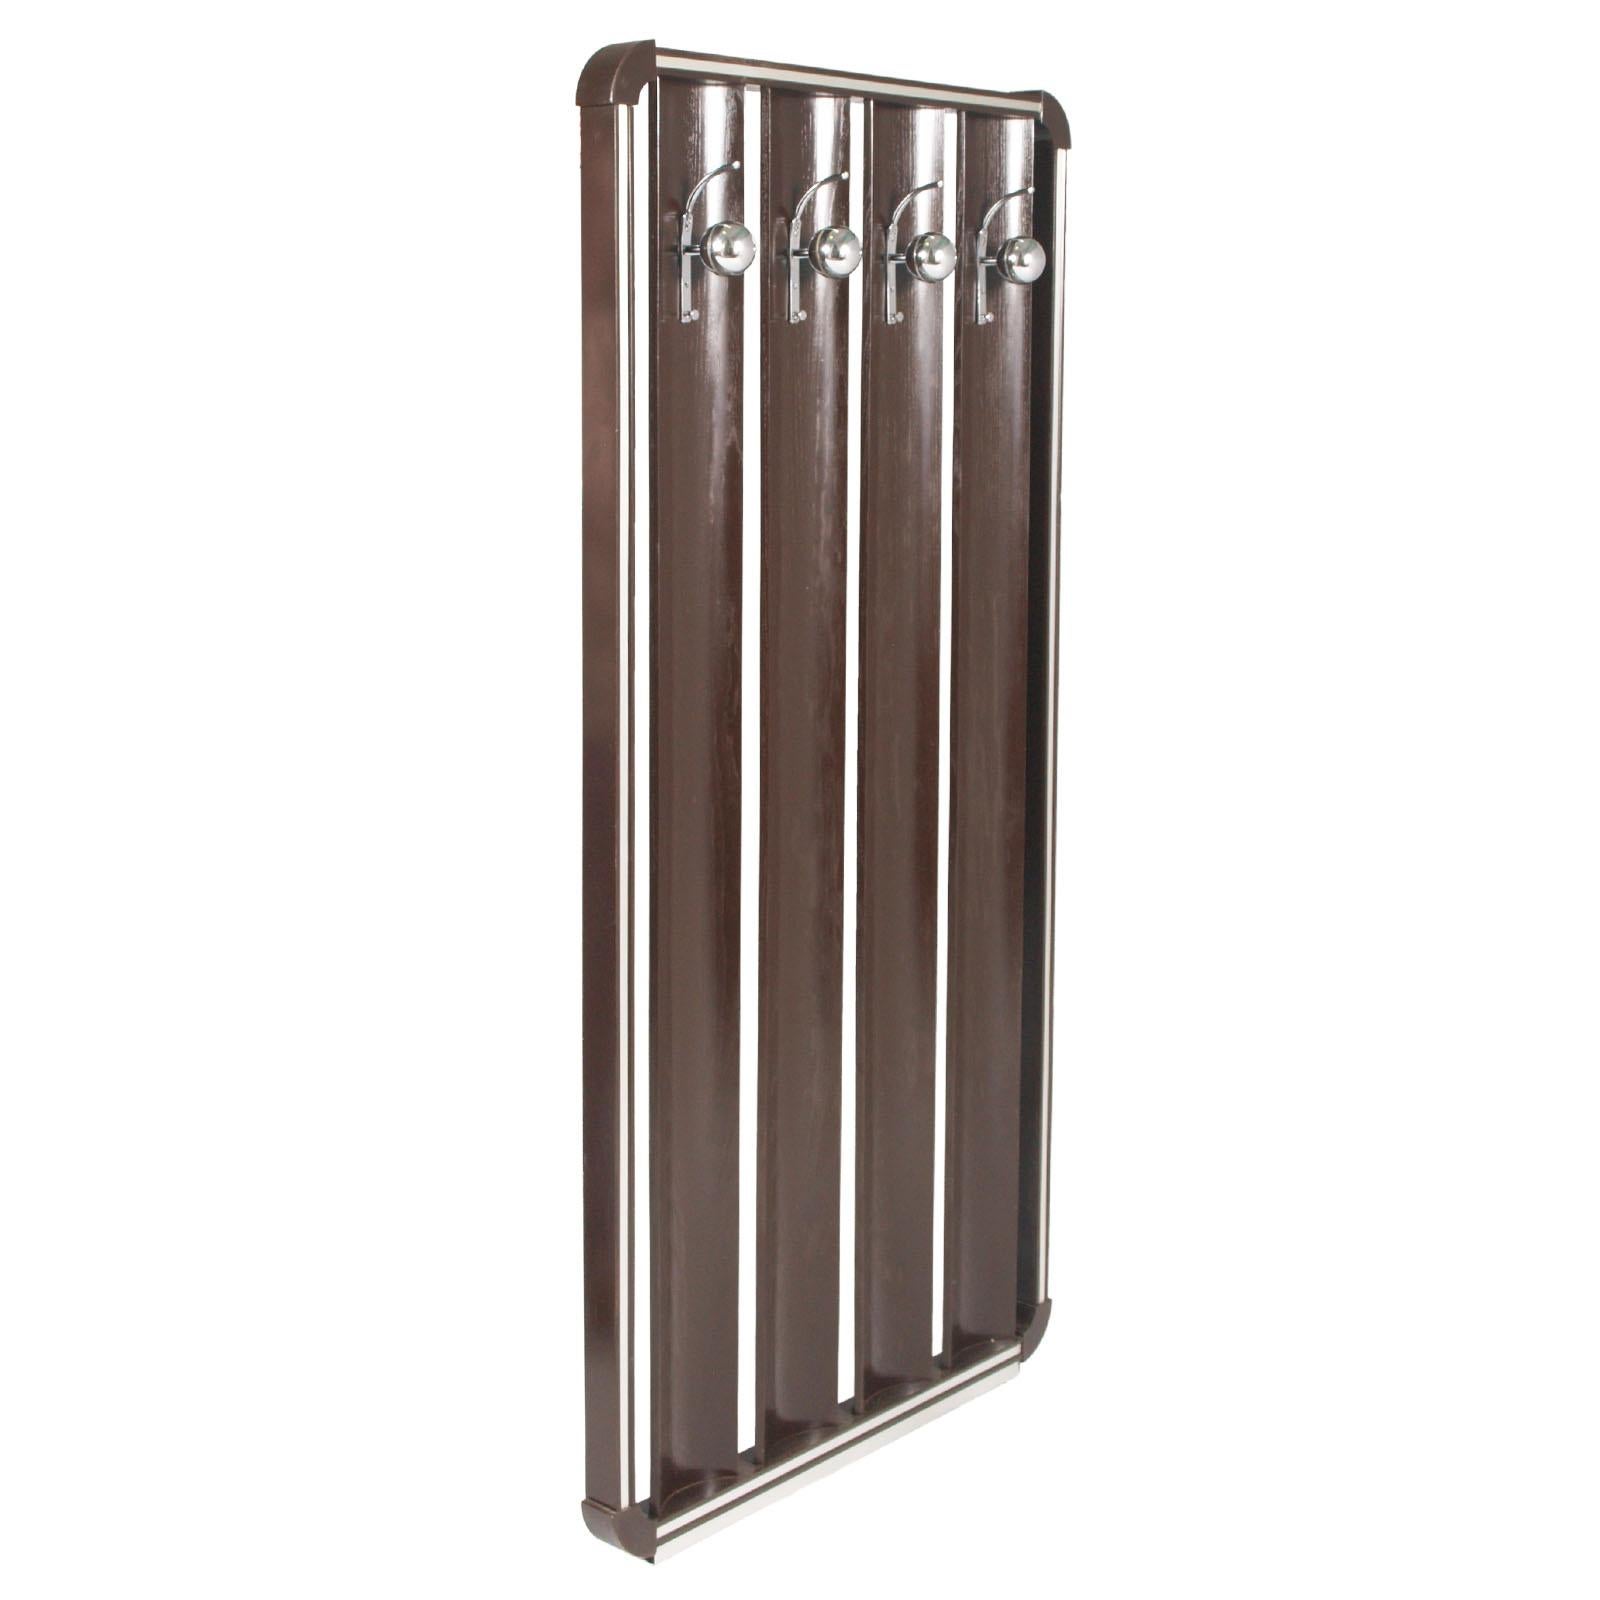 Mid-Century Modern elegant coat rack attributed to Carlo de Carli designer for Fiarm (Scorzè-Venezia) made in vertical panels of curved rosewood with spherical hooks in chromed metal, like the strips for embellishing the rosewood frame

Measures cm: